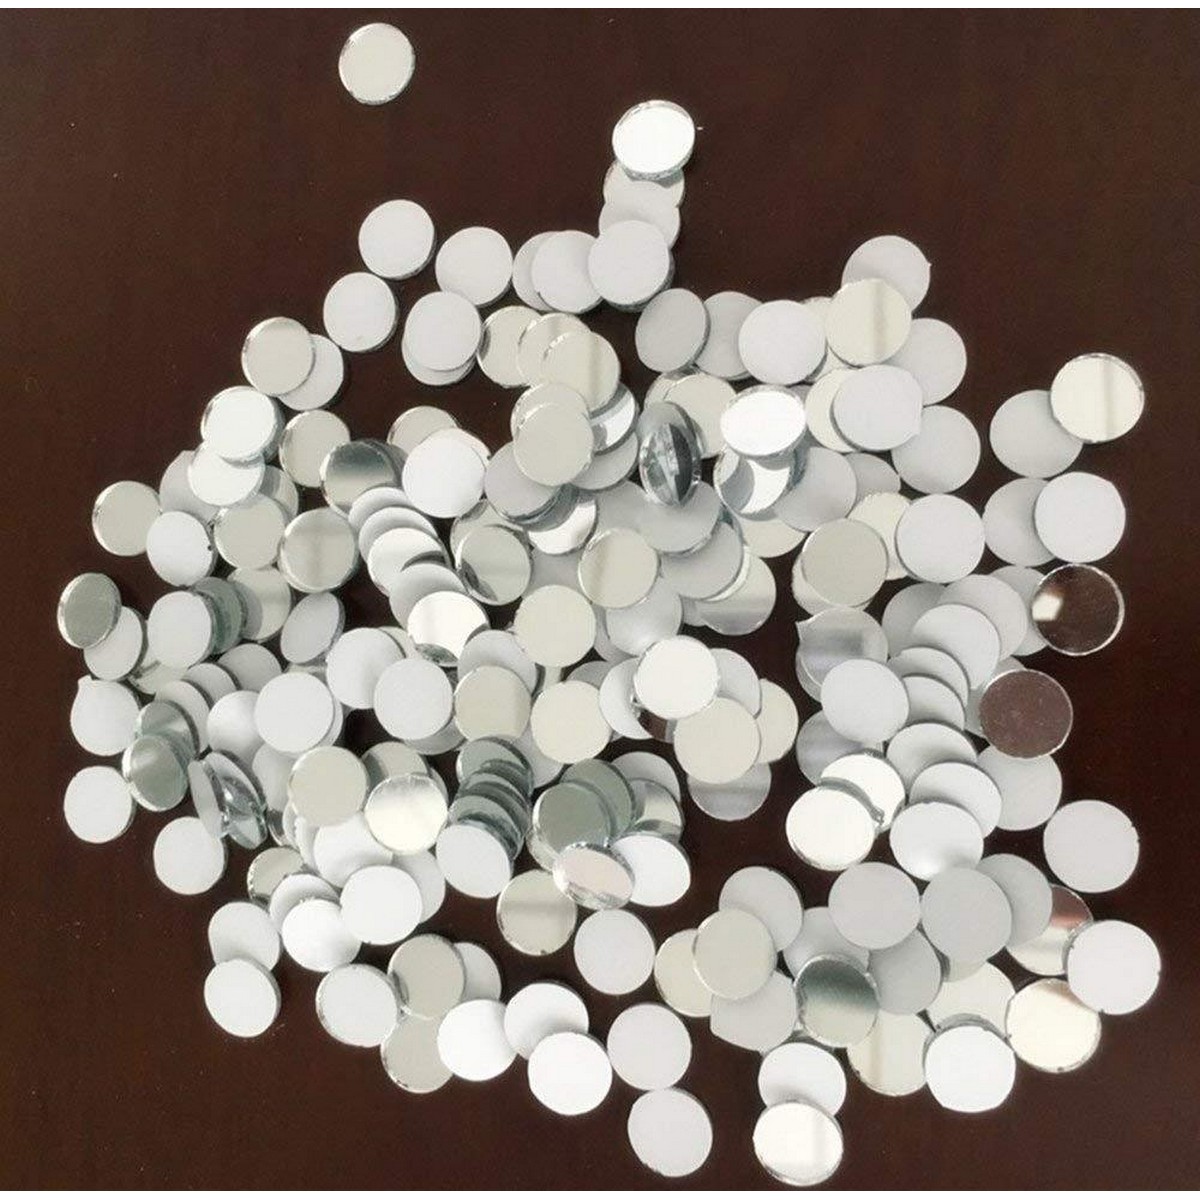 Set of 400 Pcs Small Round Glass Crafts, Real Glass Mirror Mosaic Tiles  (1x1cm)